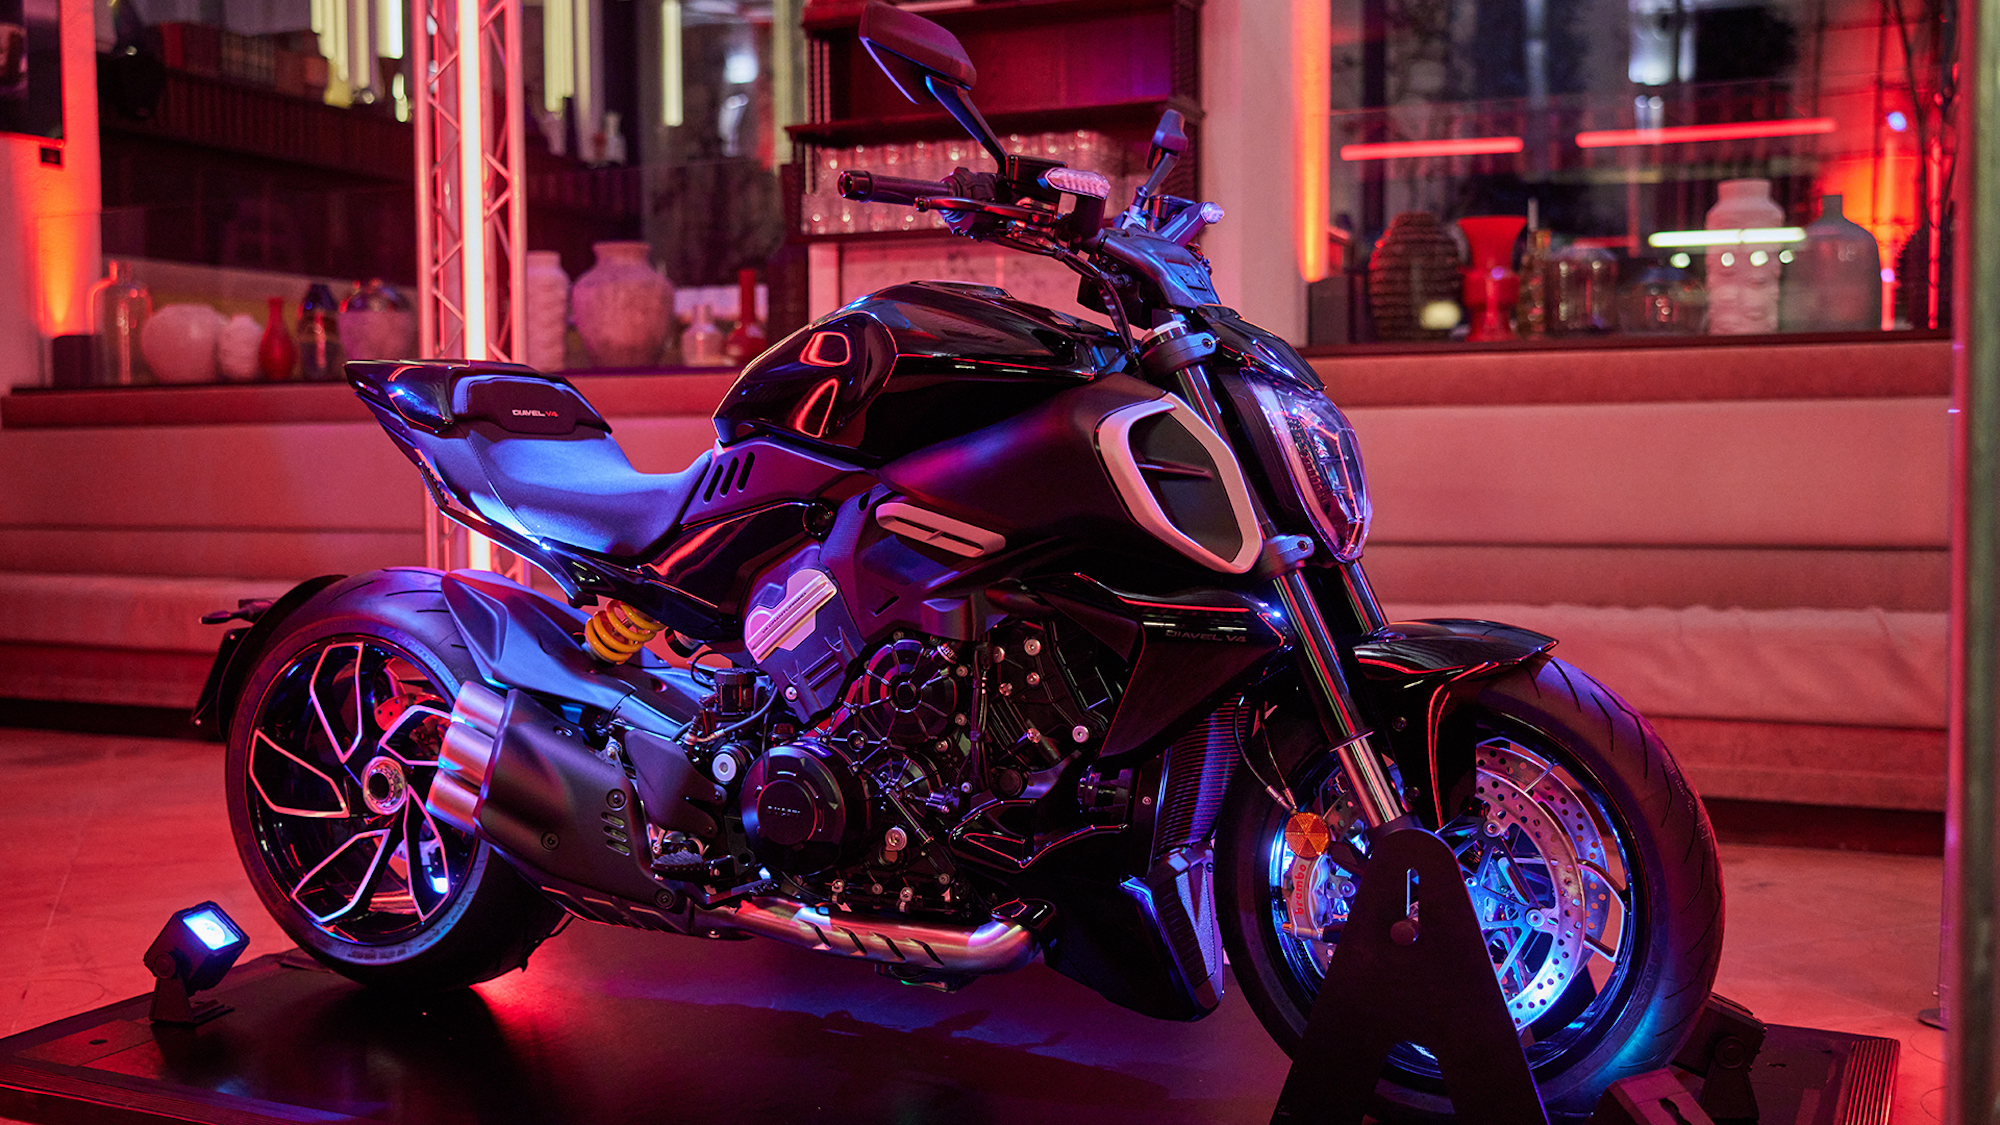 Ducati's deigns nights, during which Ducati celebrated their all-new Dial V4. Medi sourced from Ducati's press release.